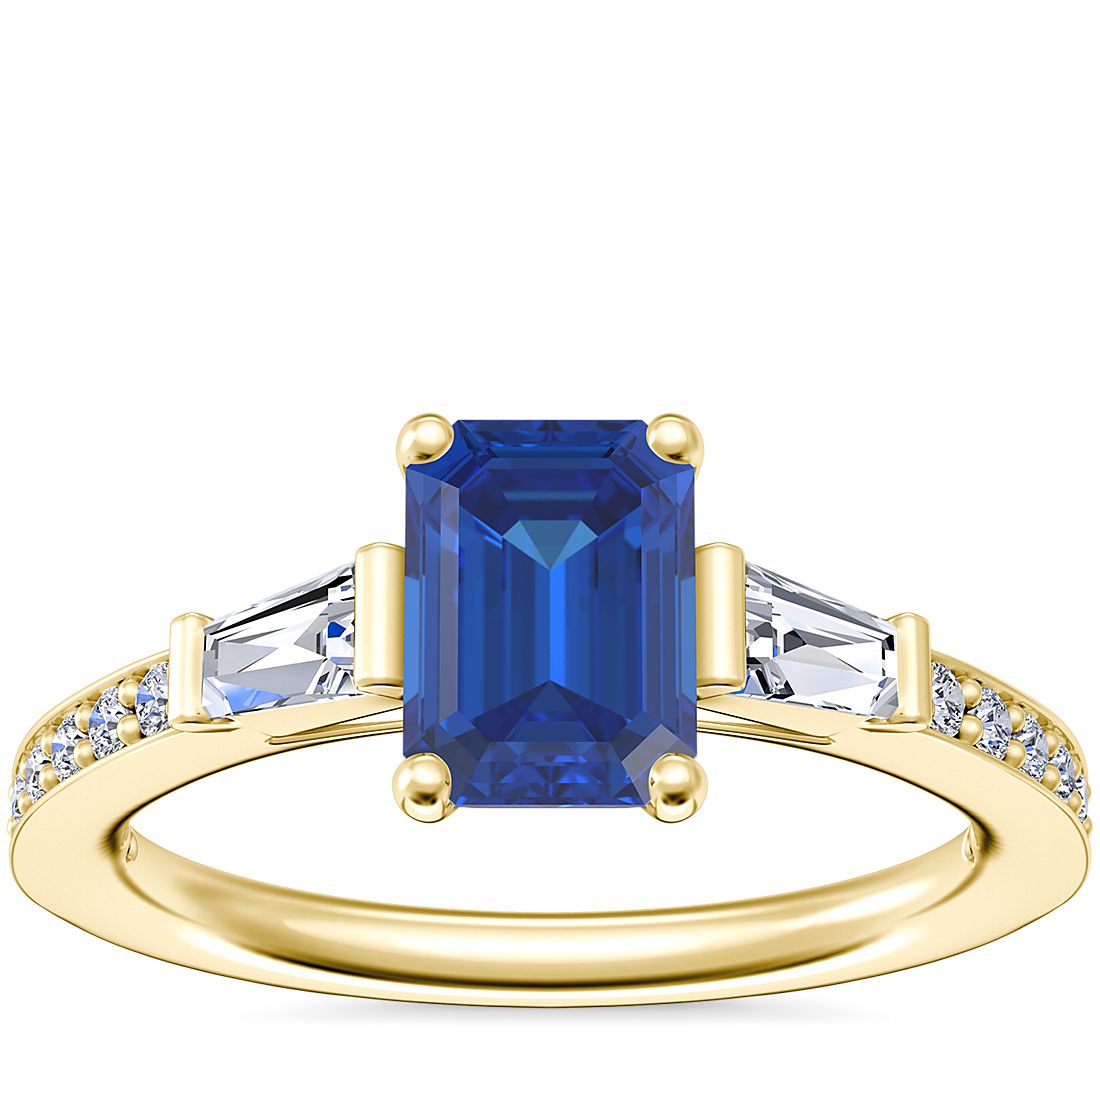 Tapered Baguette Diamond Cathedral Engagement Ring with Emerald-Cut Sapphire in 14k Yellow Gold (7x5mm)